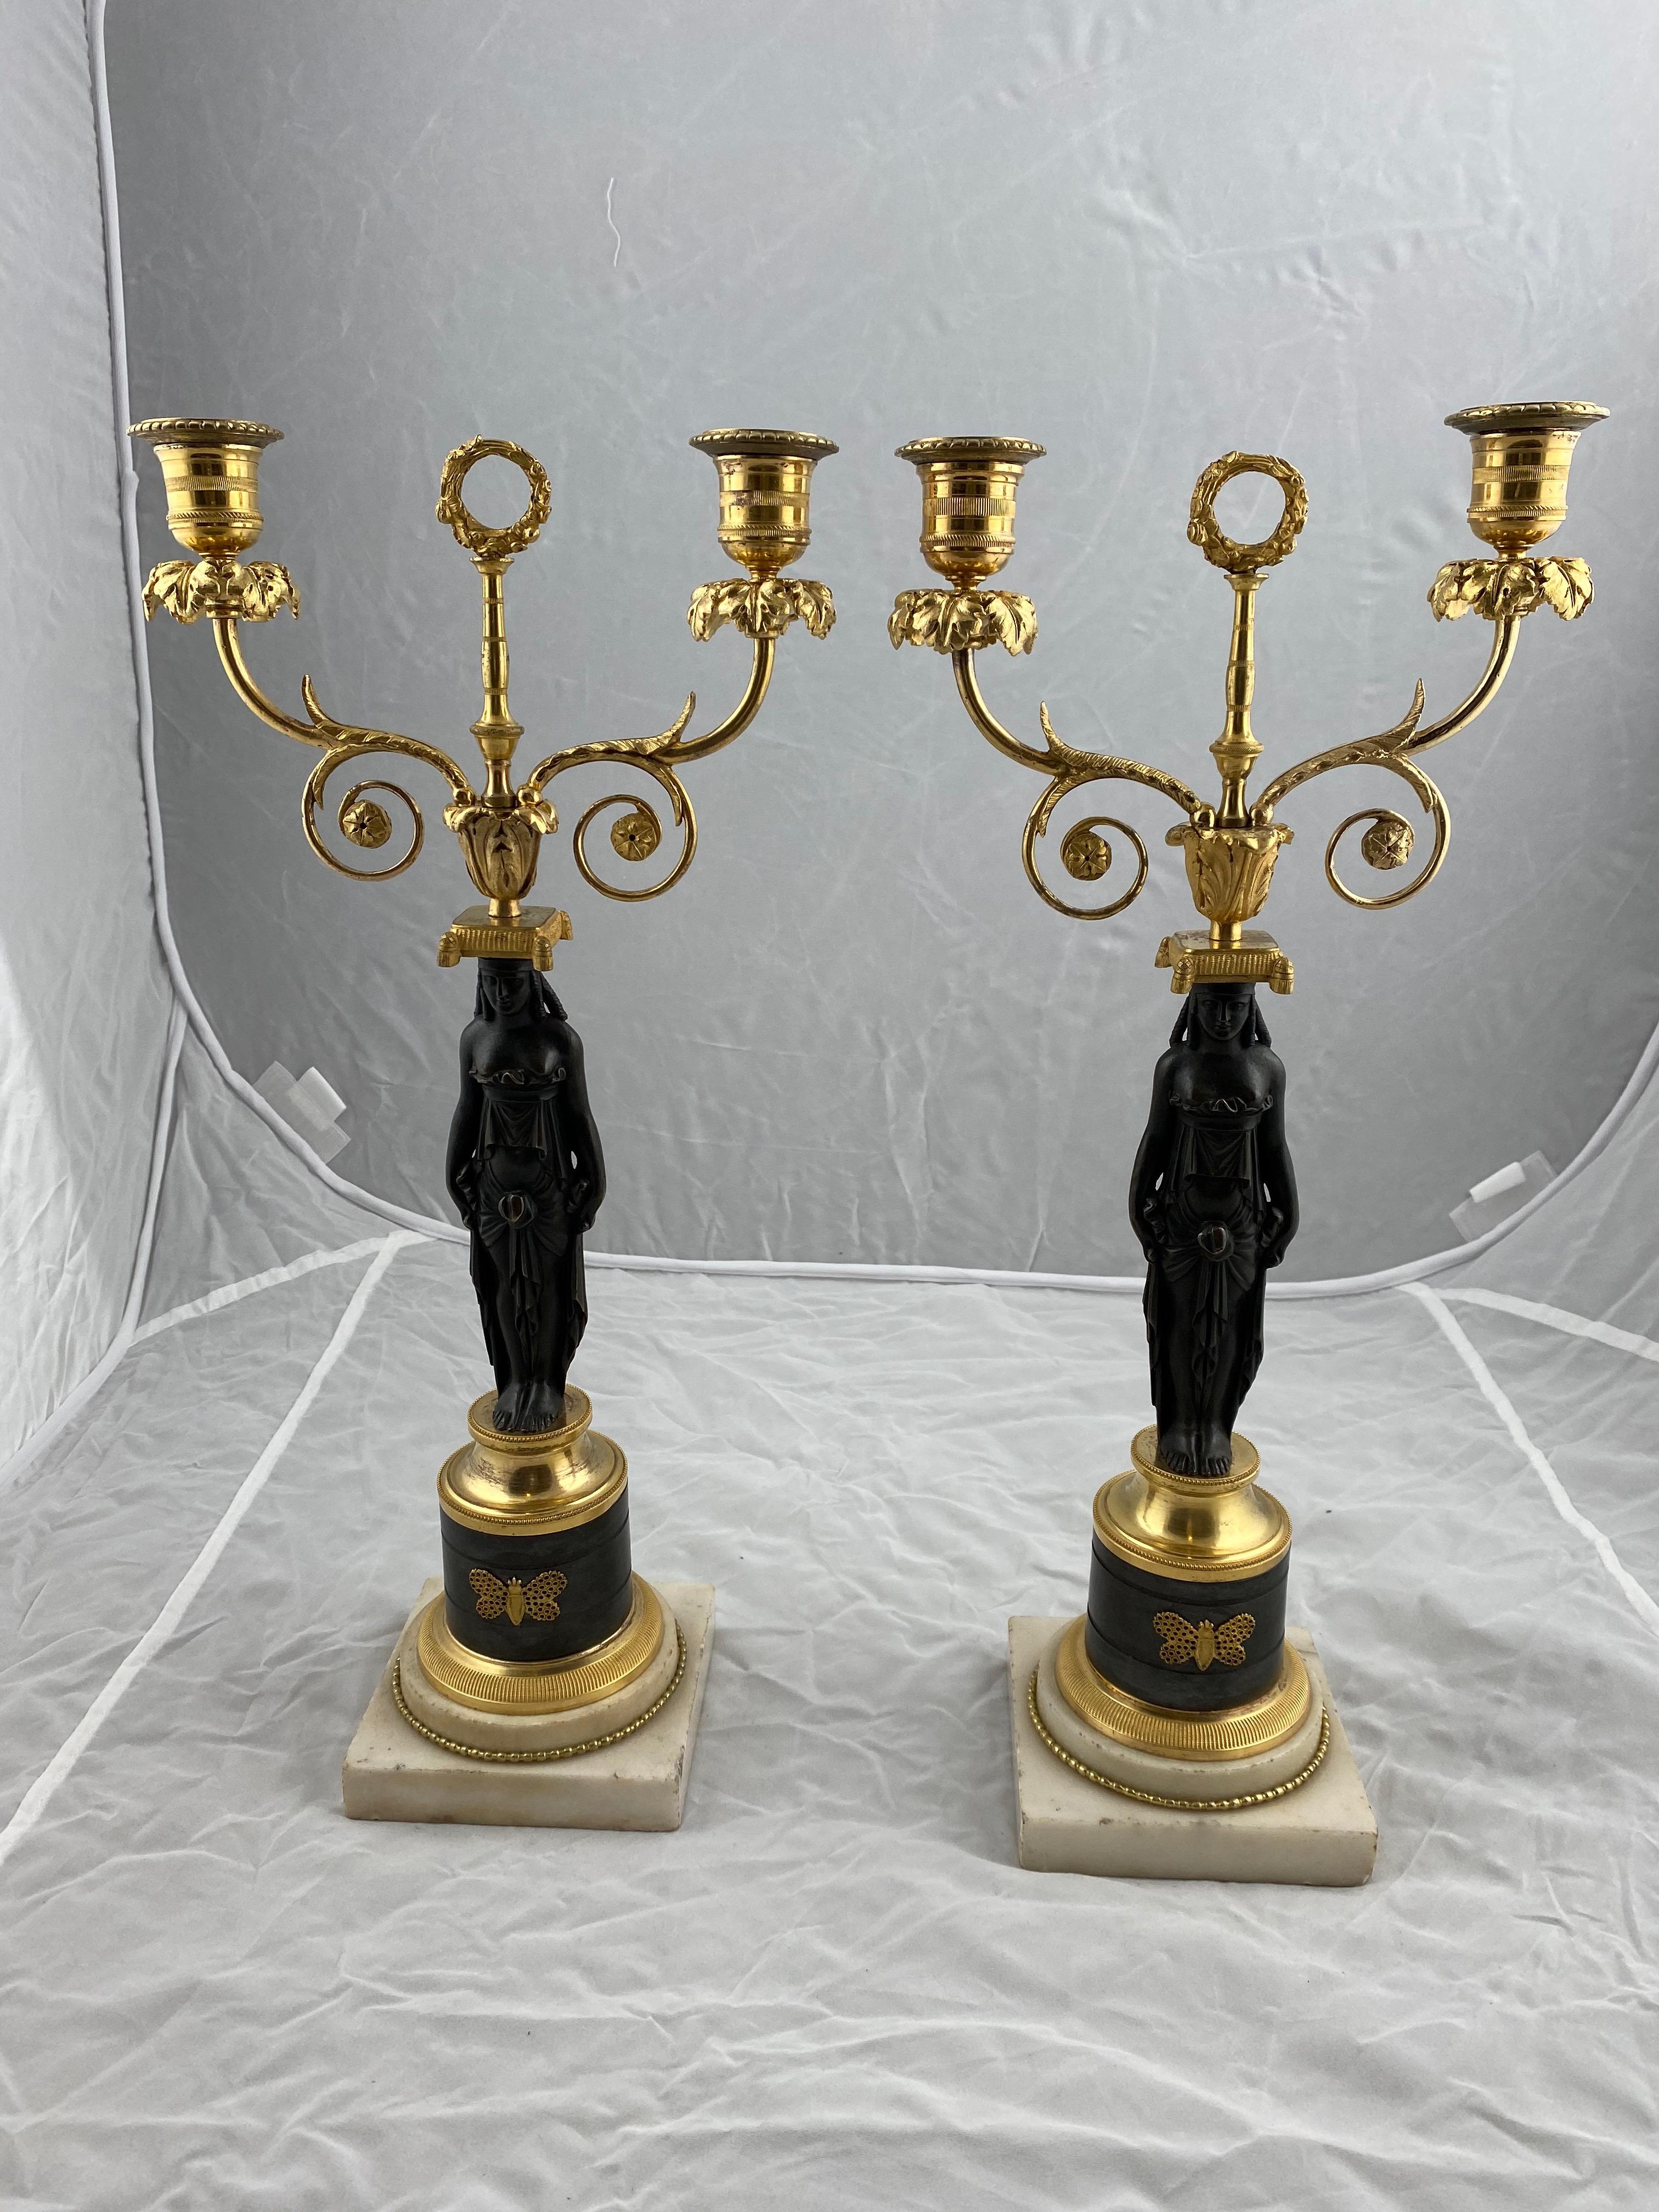 A nice pair of candelabras made for two candles each. Marble bases with dark-adapted columns on which Greek Roman Goddesses stand bearing the candleholders on a cushion on their head.
Unusual design.